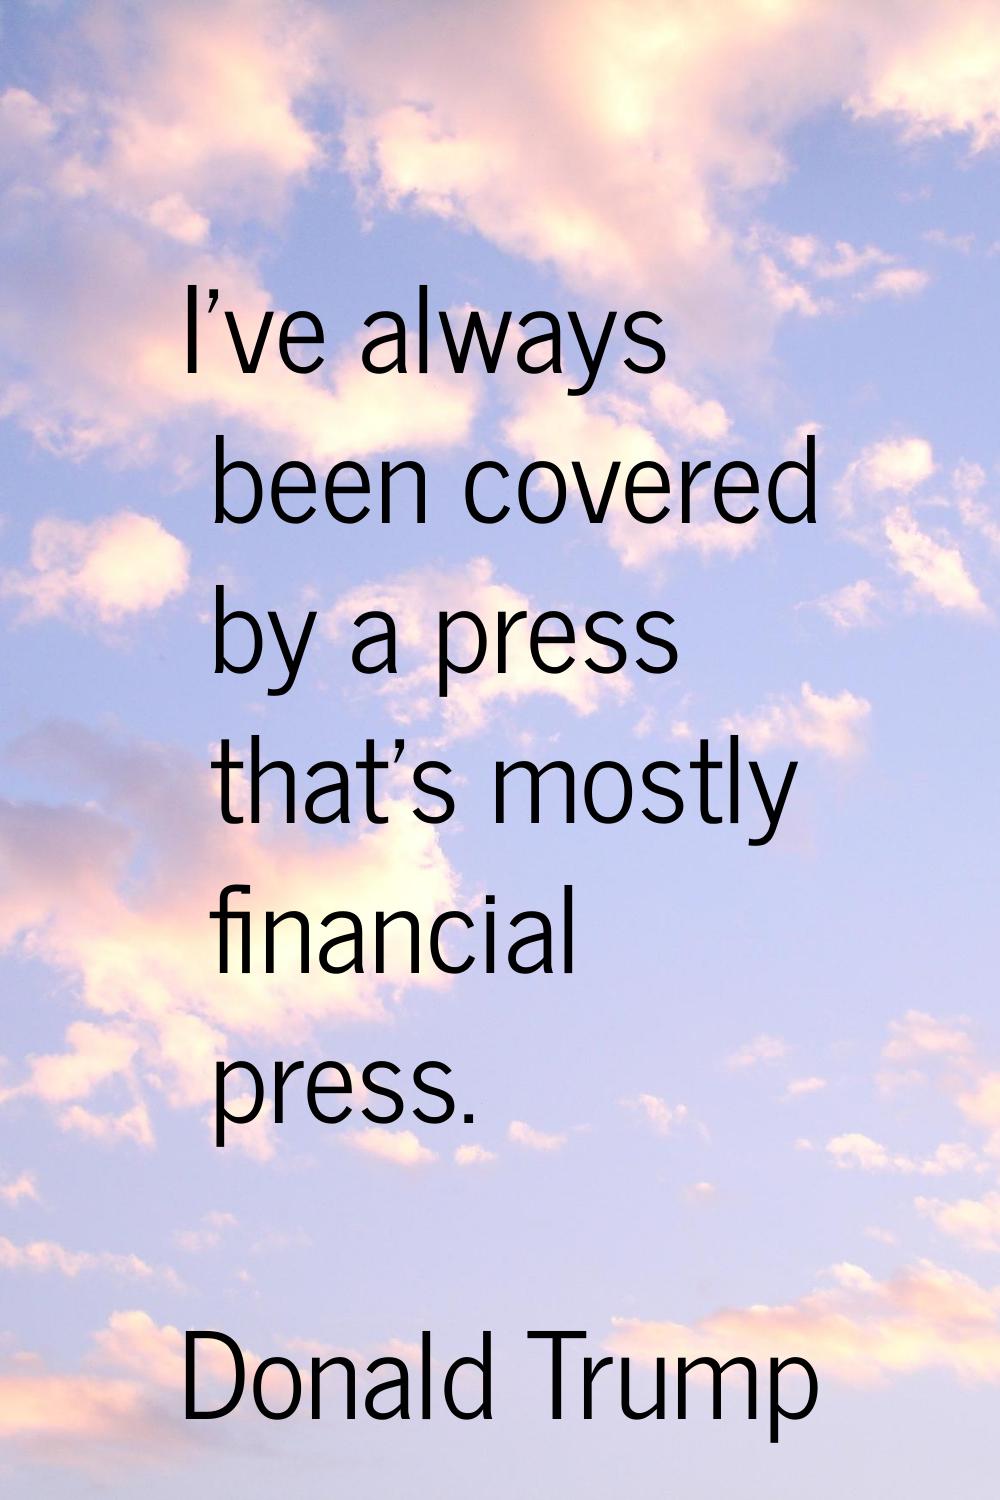 I've always been covered by a press that's mostly financial press.